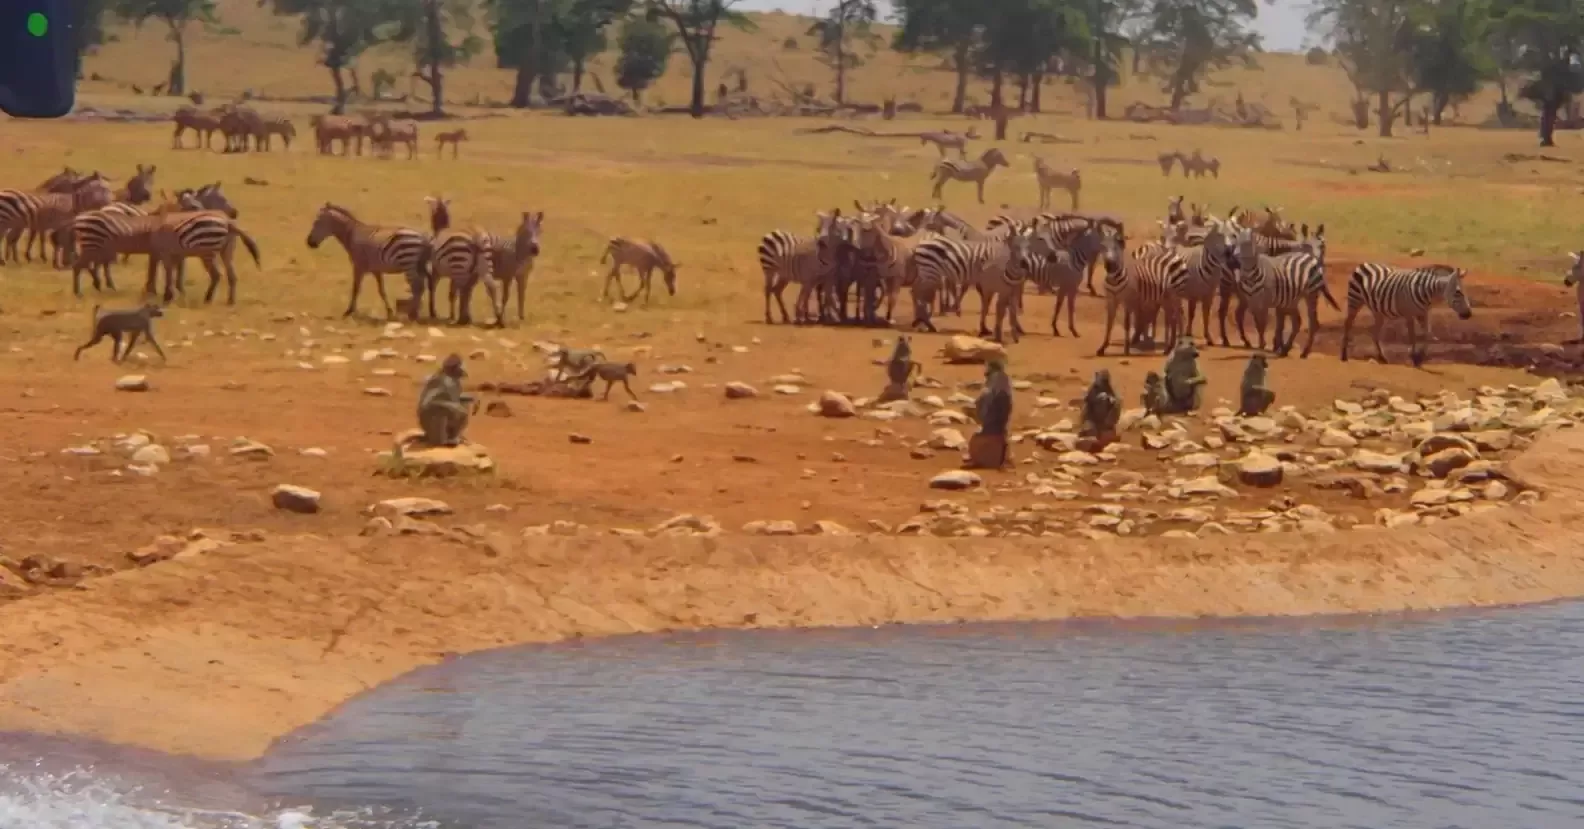 A man travels for hours daily through a drought to provide water for wild animals 8